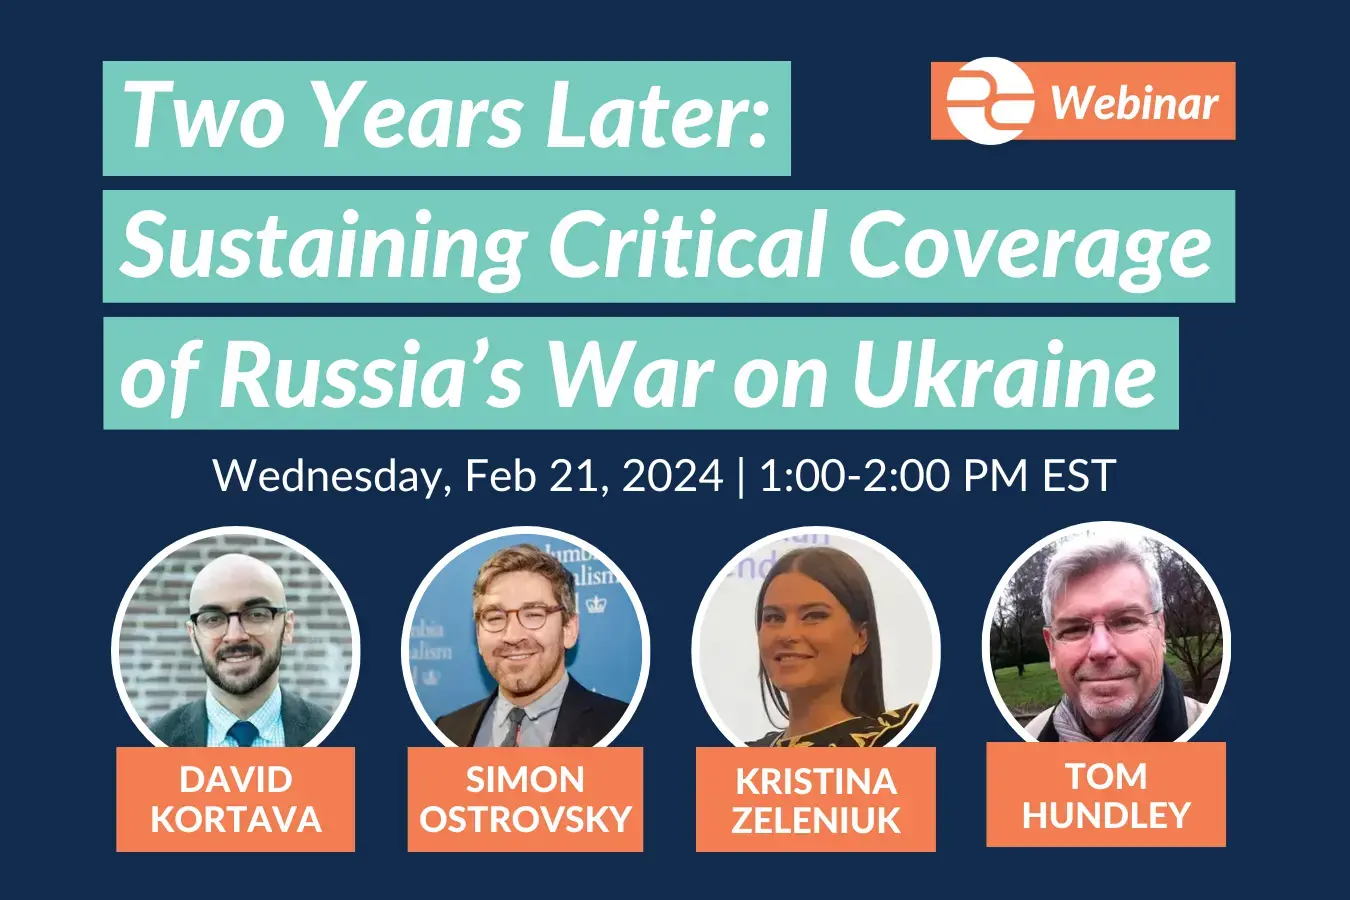 "Two Years Later: Sustaining Critical Coverage of Russia’s War on Ukraine" webinar